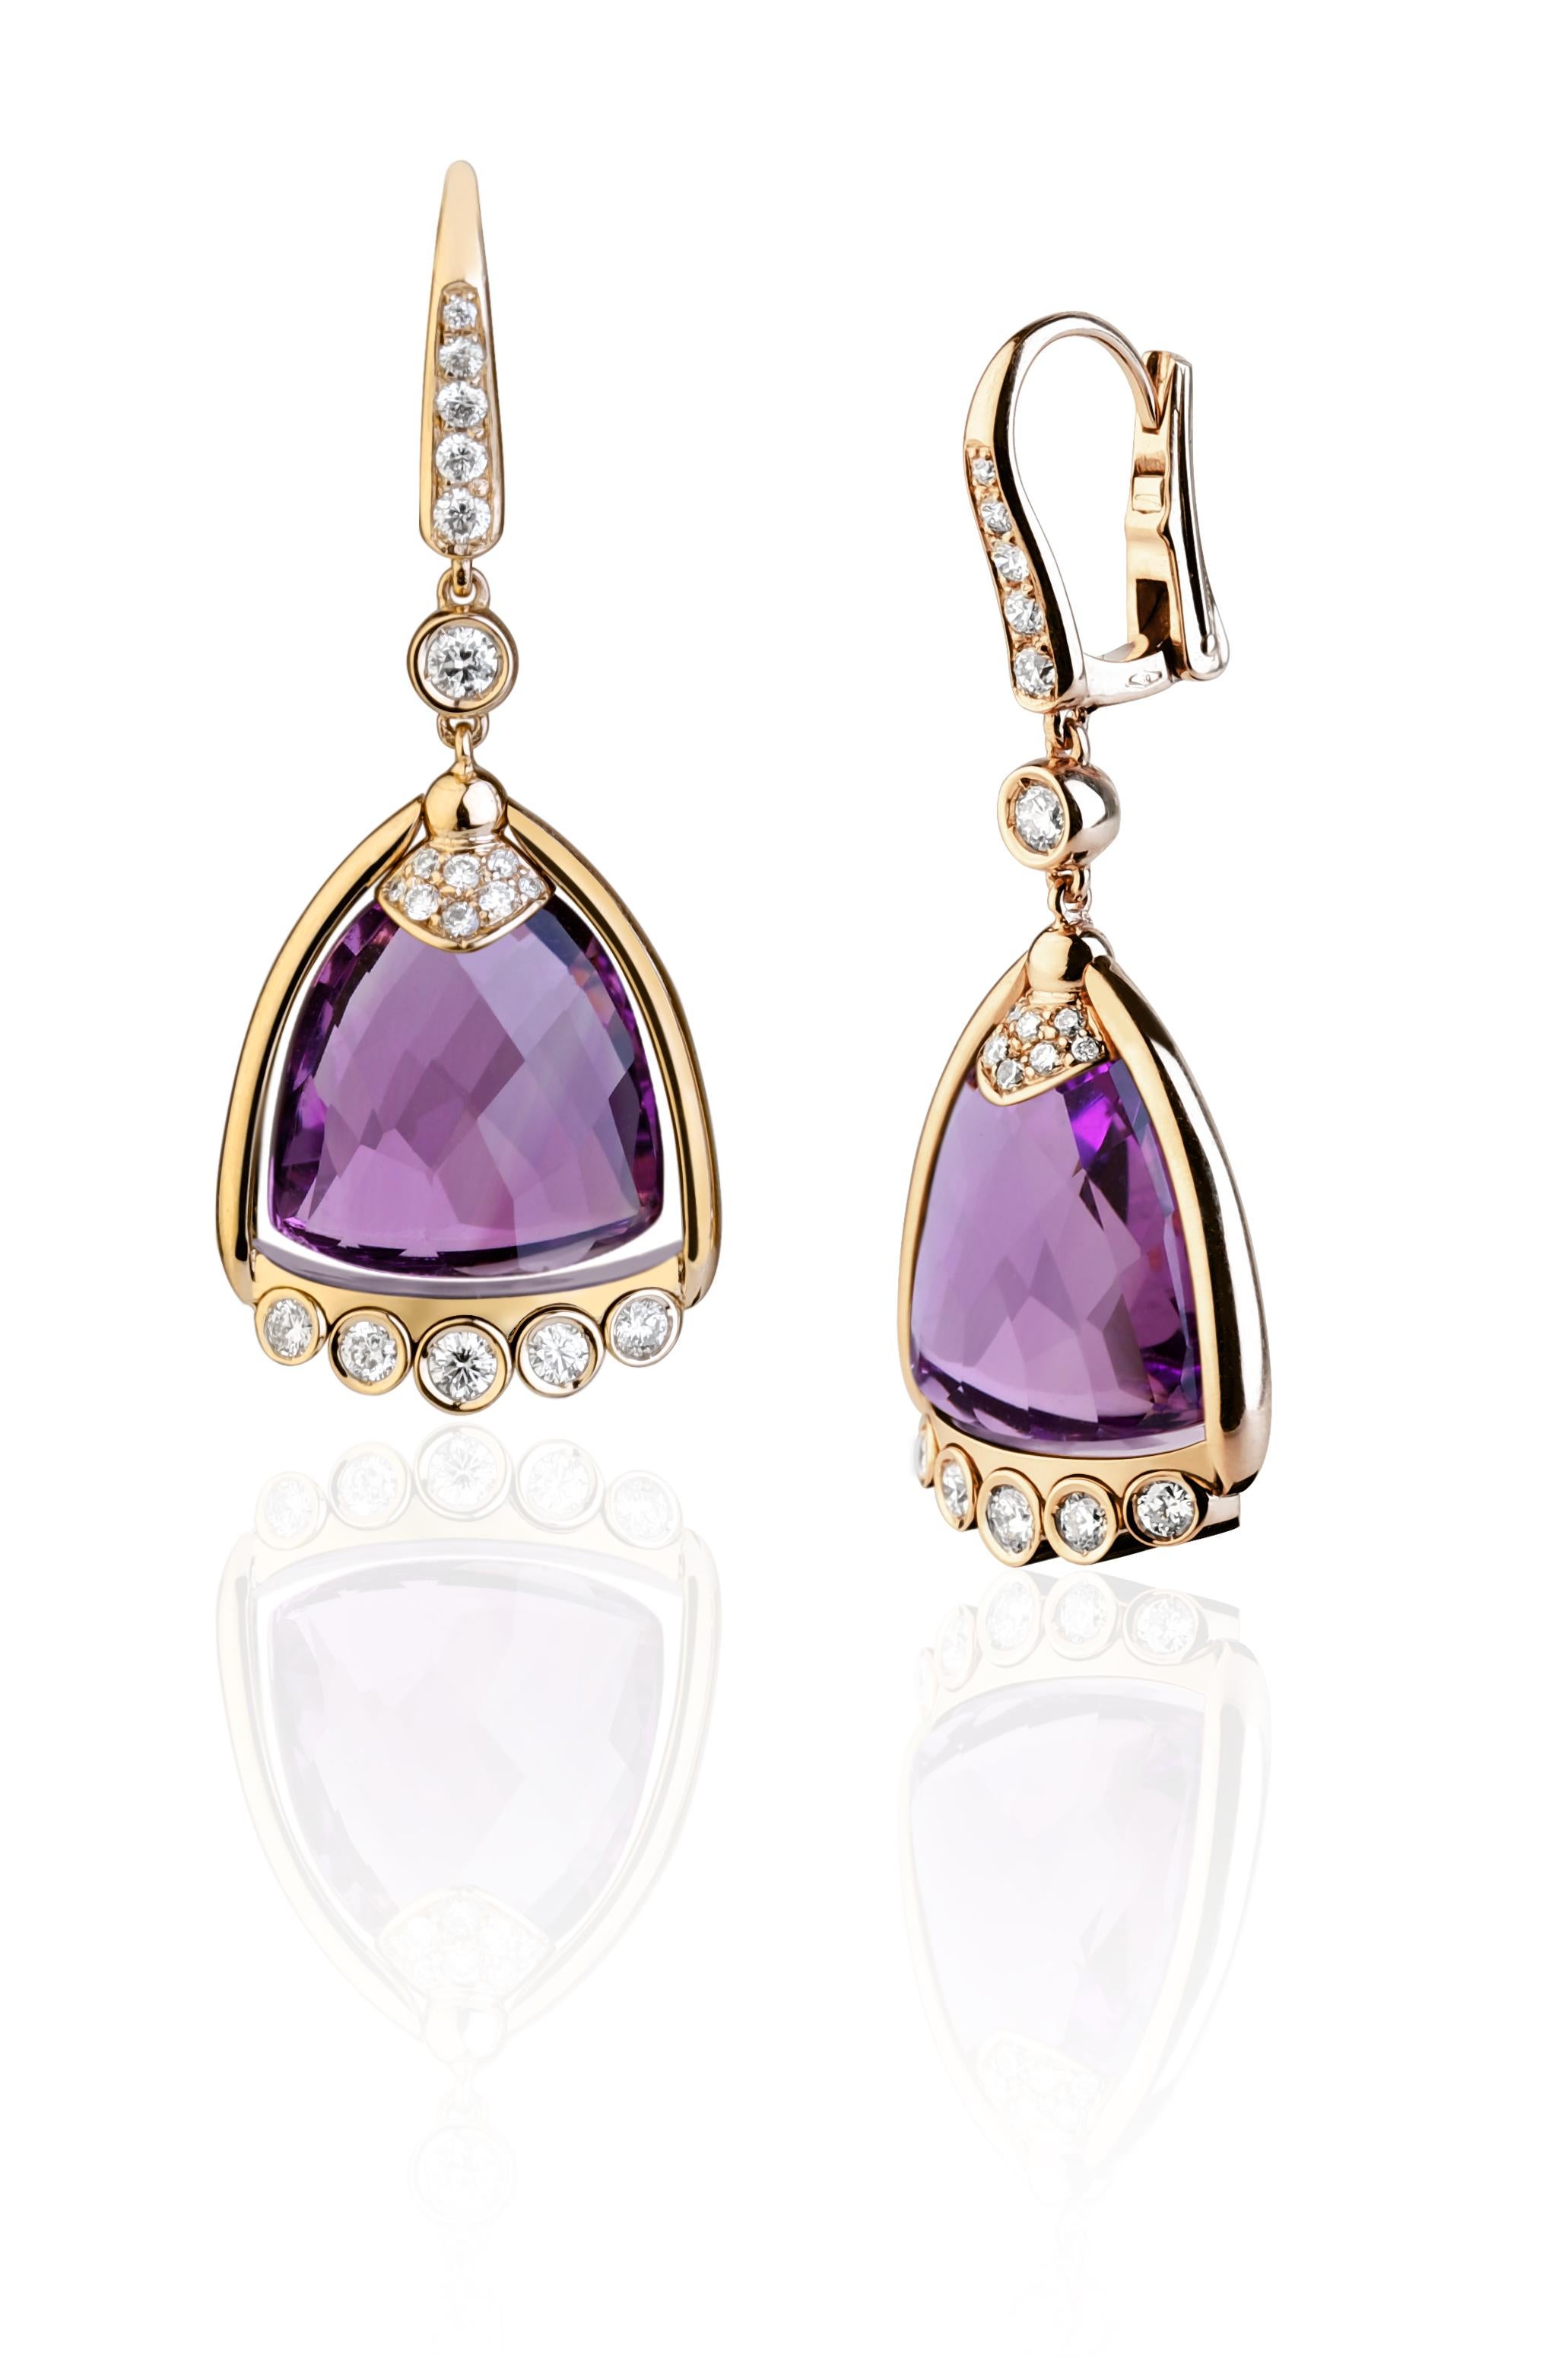 Bell Collection by Angeletti, Gold Earrings with Amethyst and Diamonds.
The 